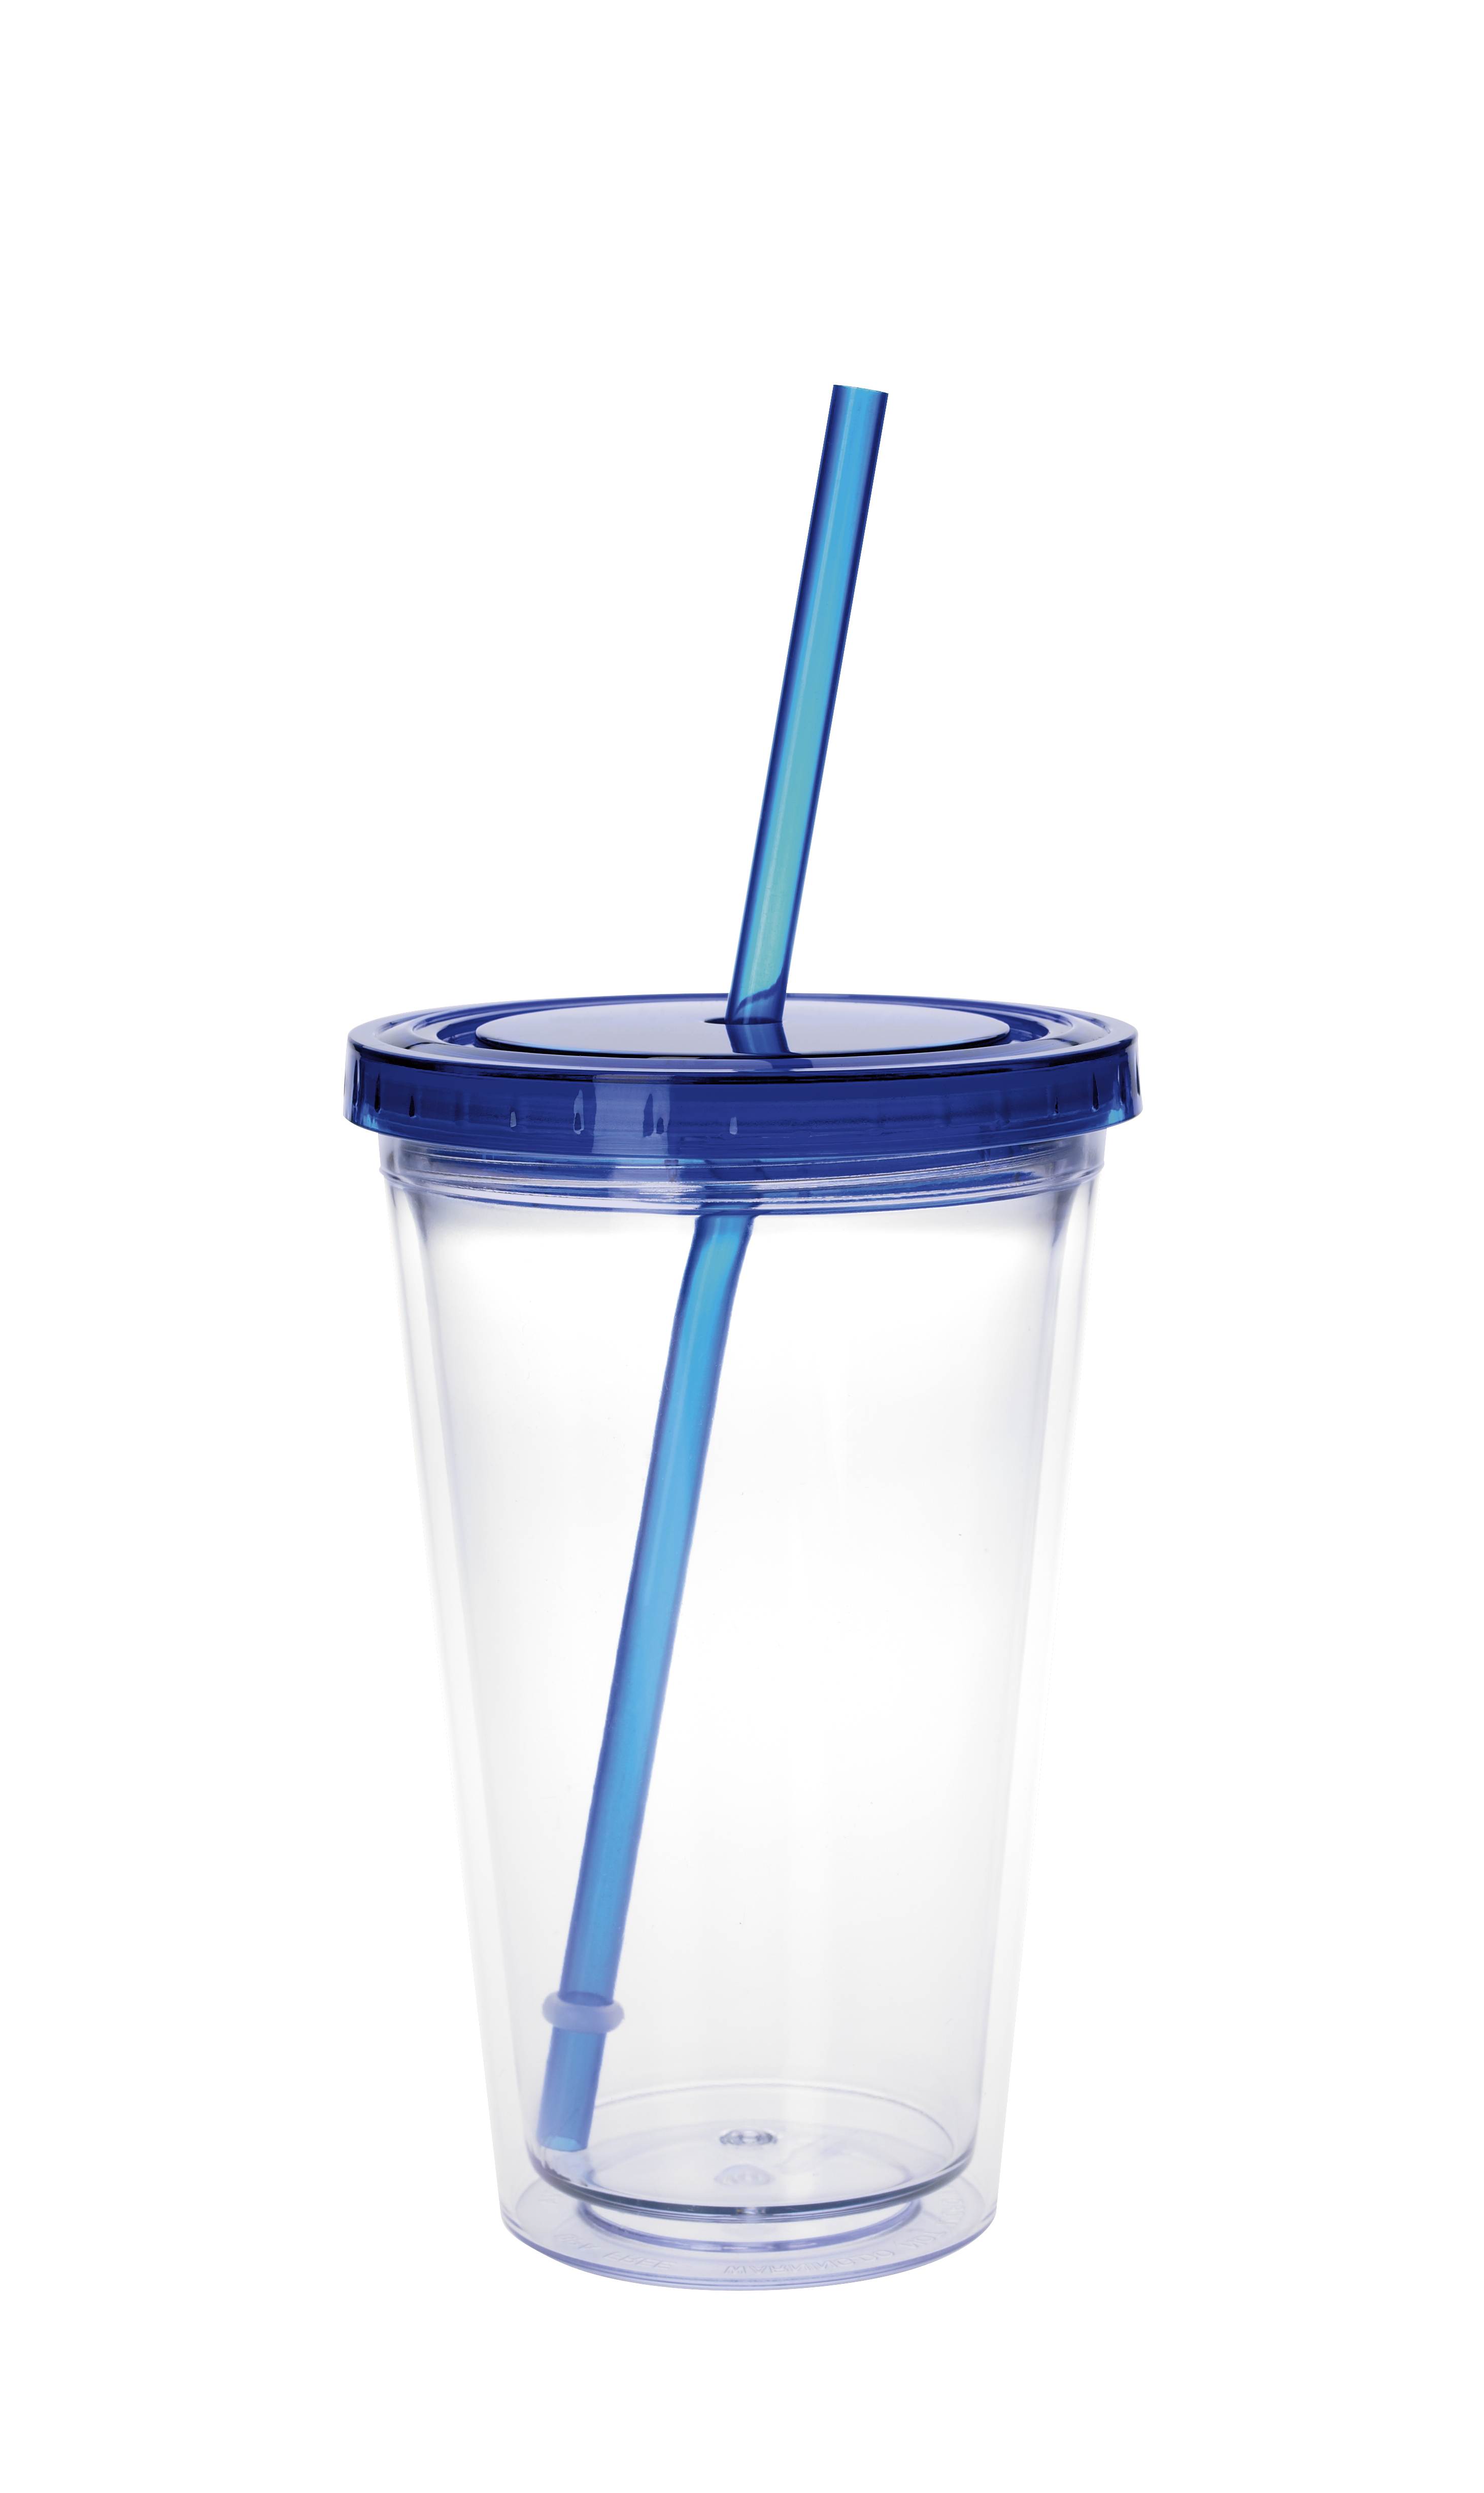 Good Value 45962 - Clear Tumbler with Colored Lid - 18 oz.